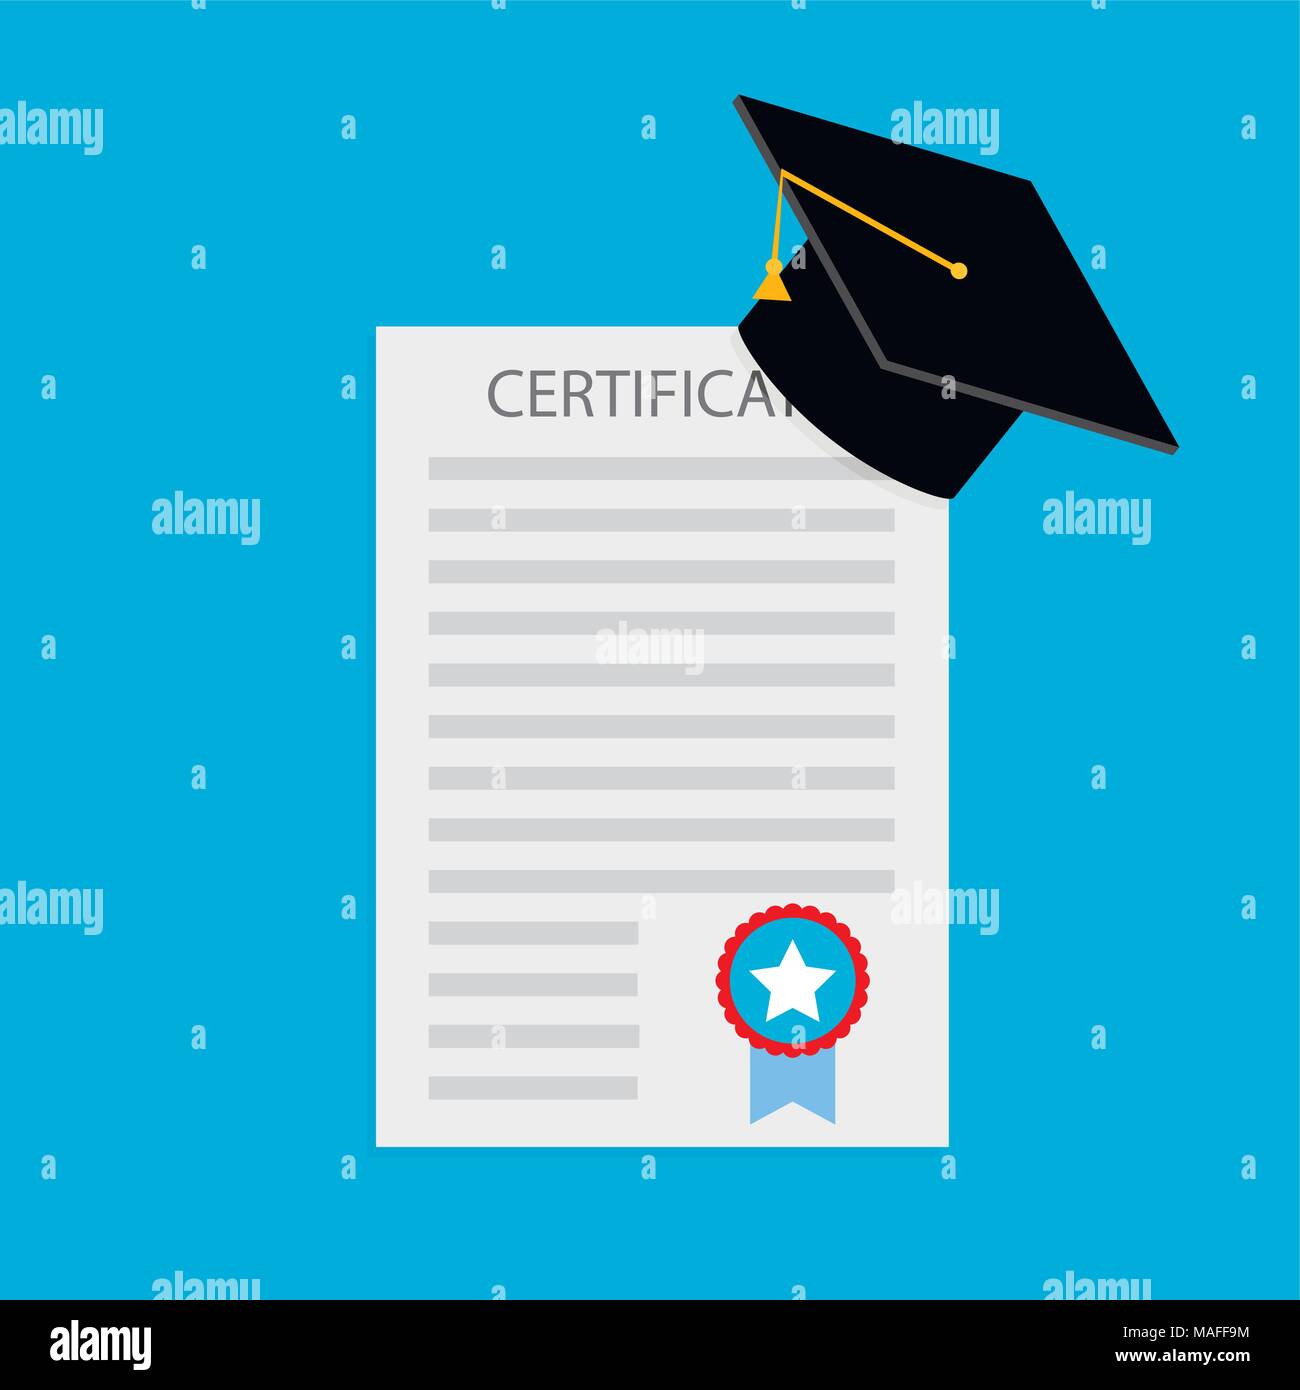 Education certificate and diploma. Certificate of education award, success document graduation, vector illustration Stock Vector